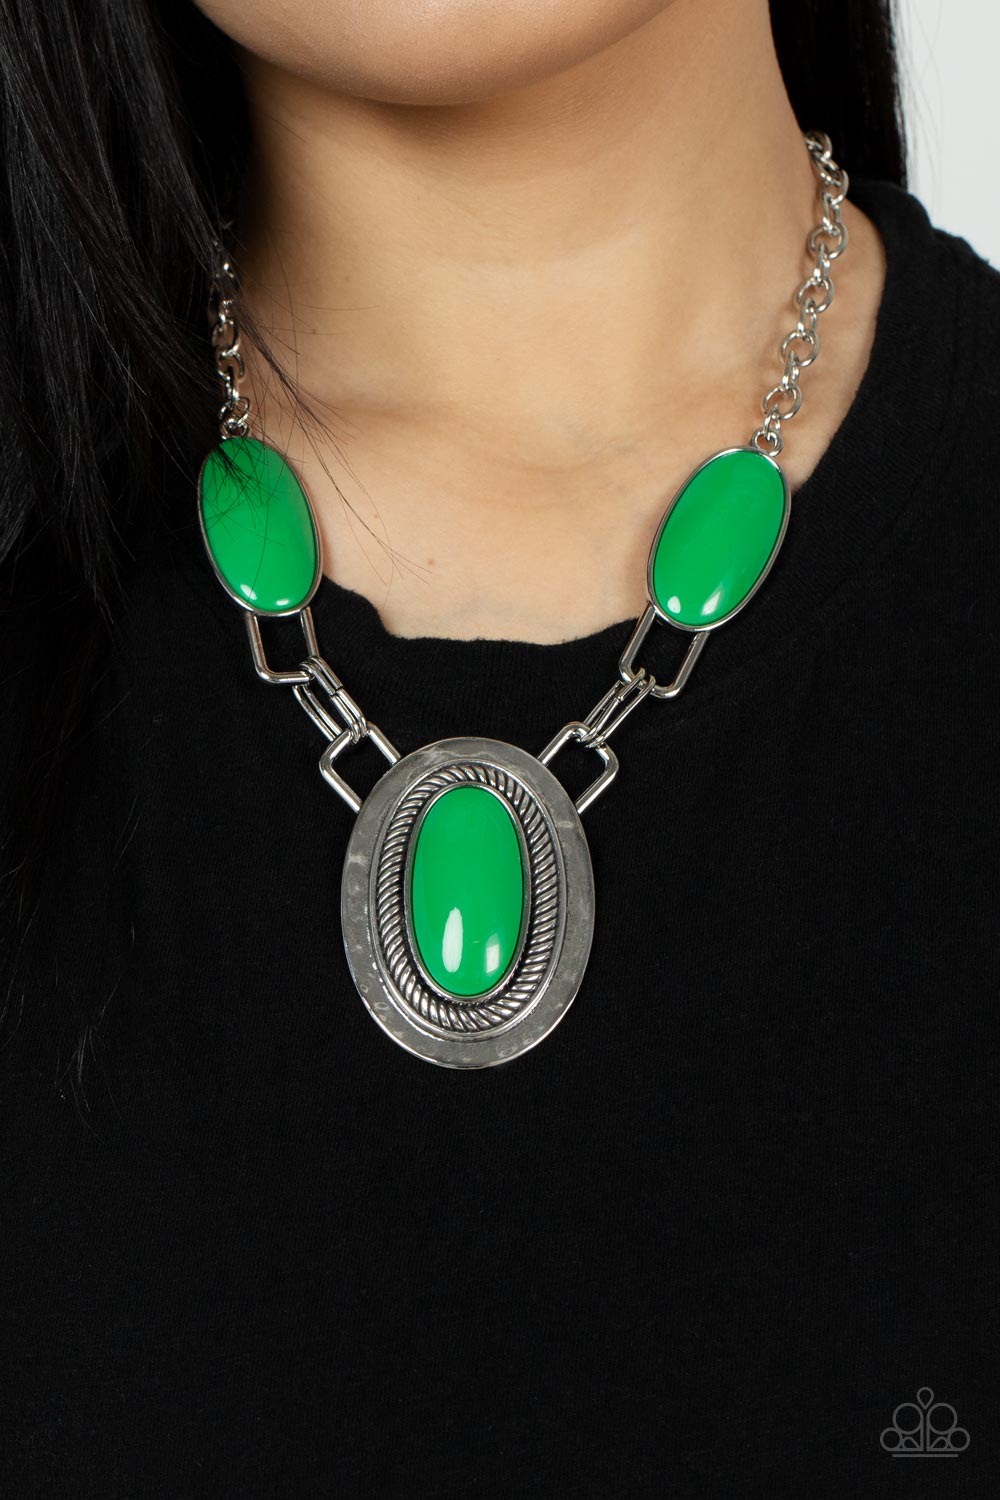 Count to TENACIOUS - Green Necklace